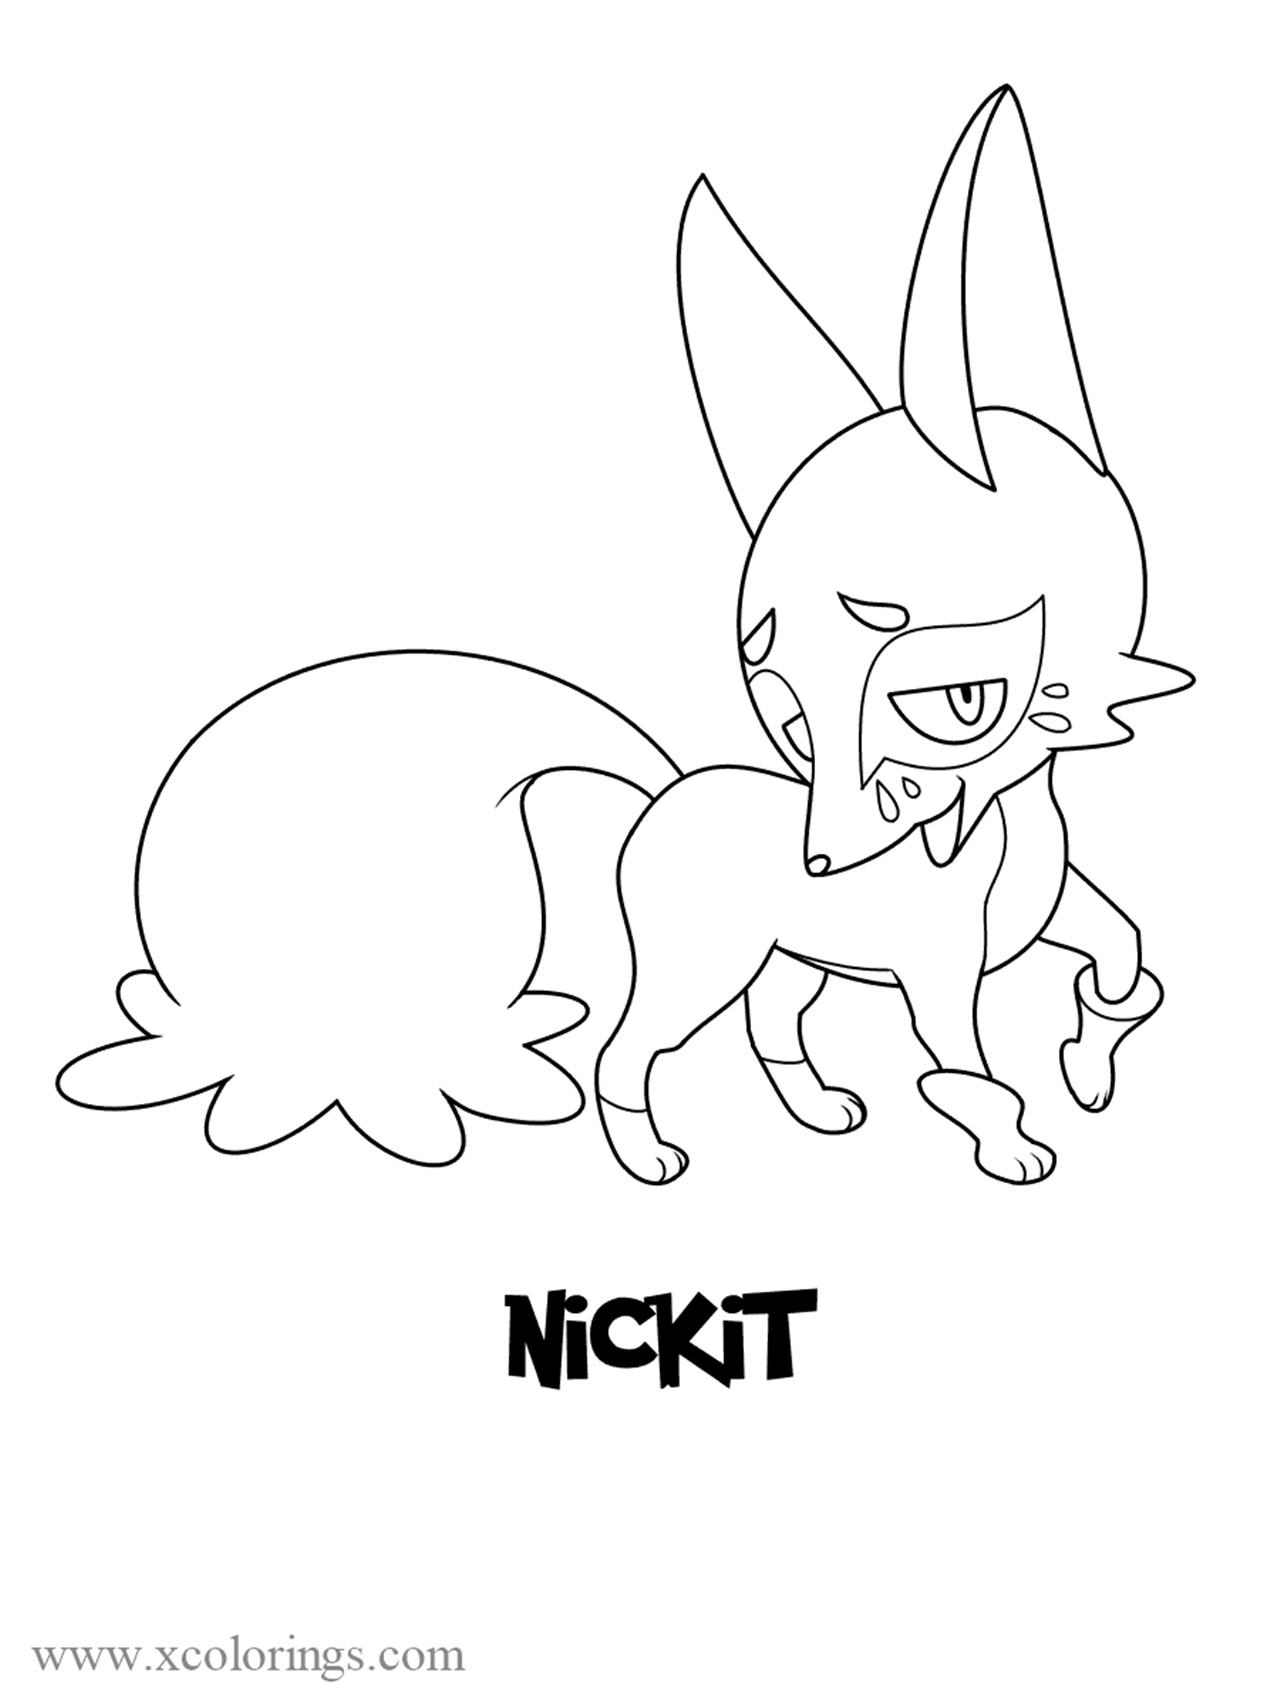 Free Pokemon sword and shield Nickit Coloring Pages printable